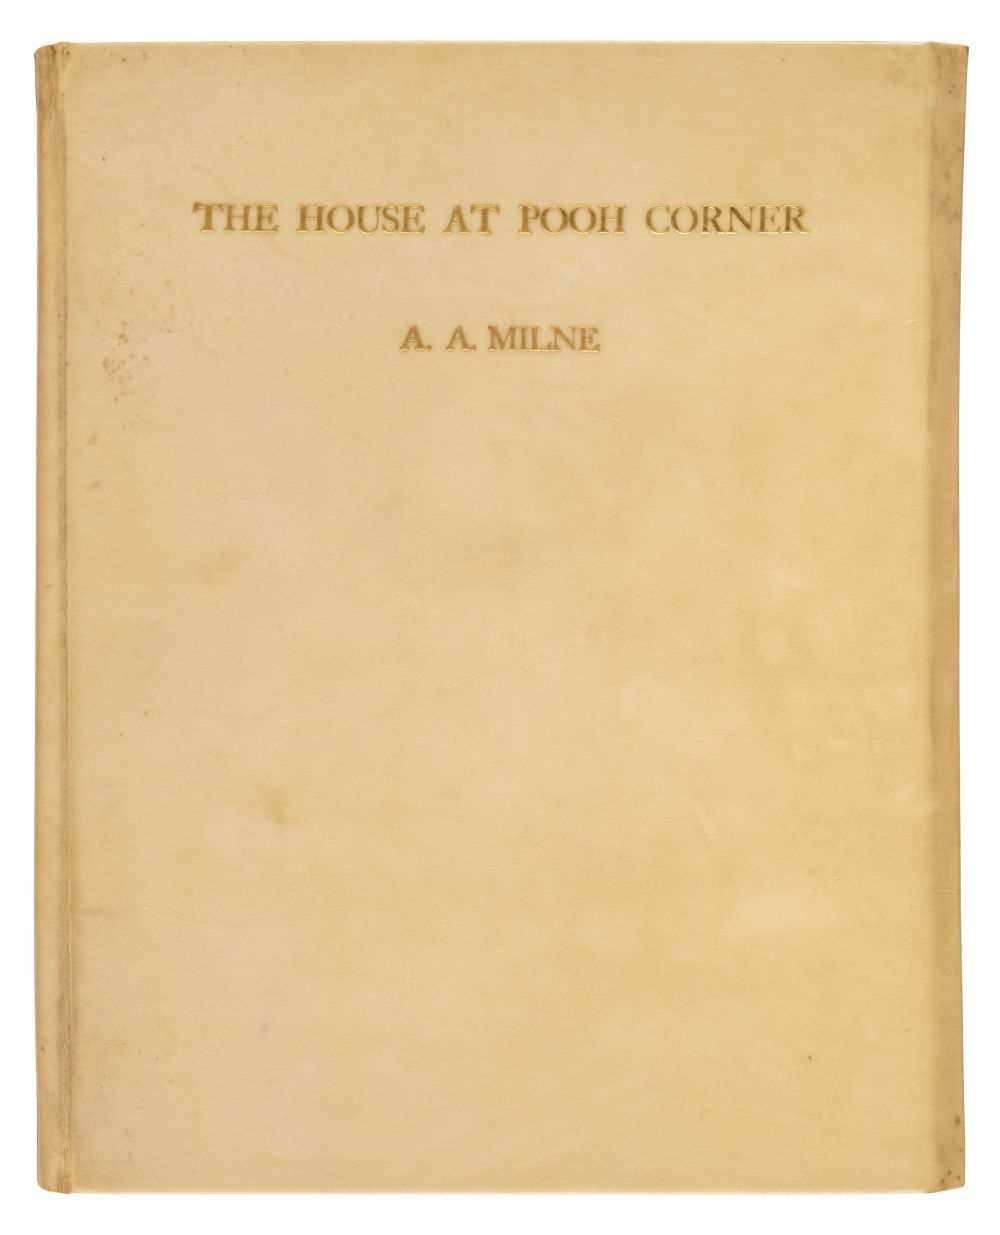 Lot 573 - Milne (A.A.) The House at Pooh Corner, limited edition of 20, 1928